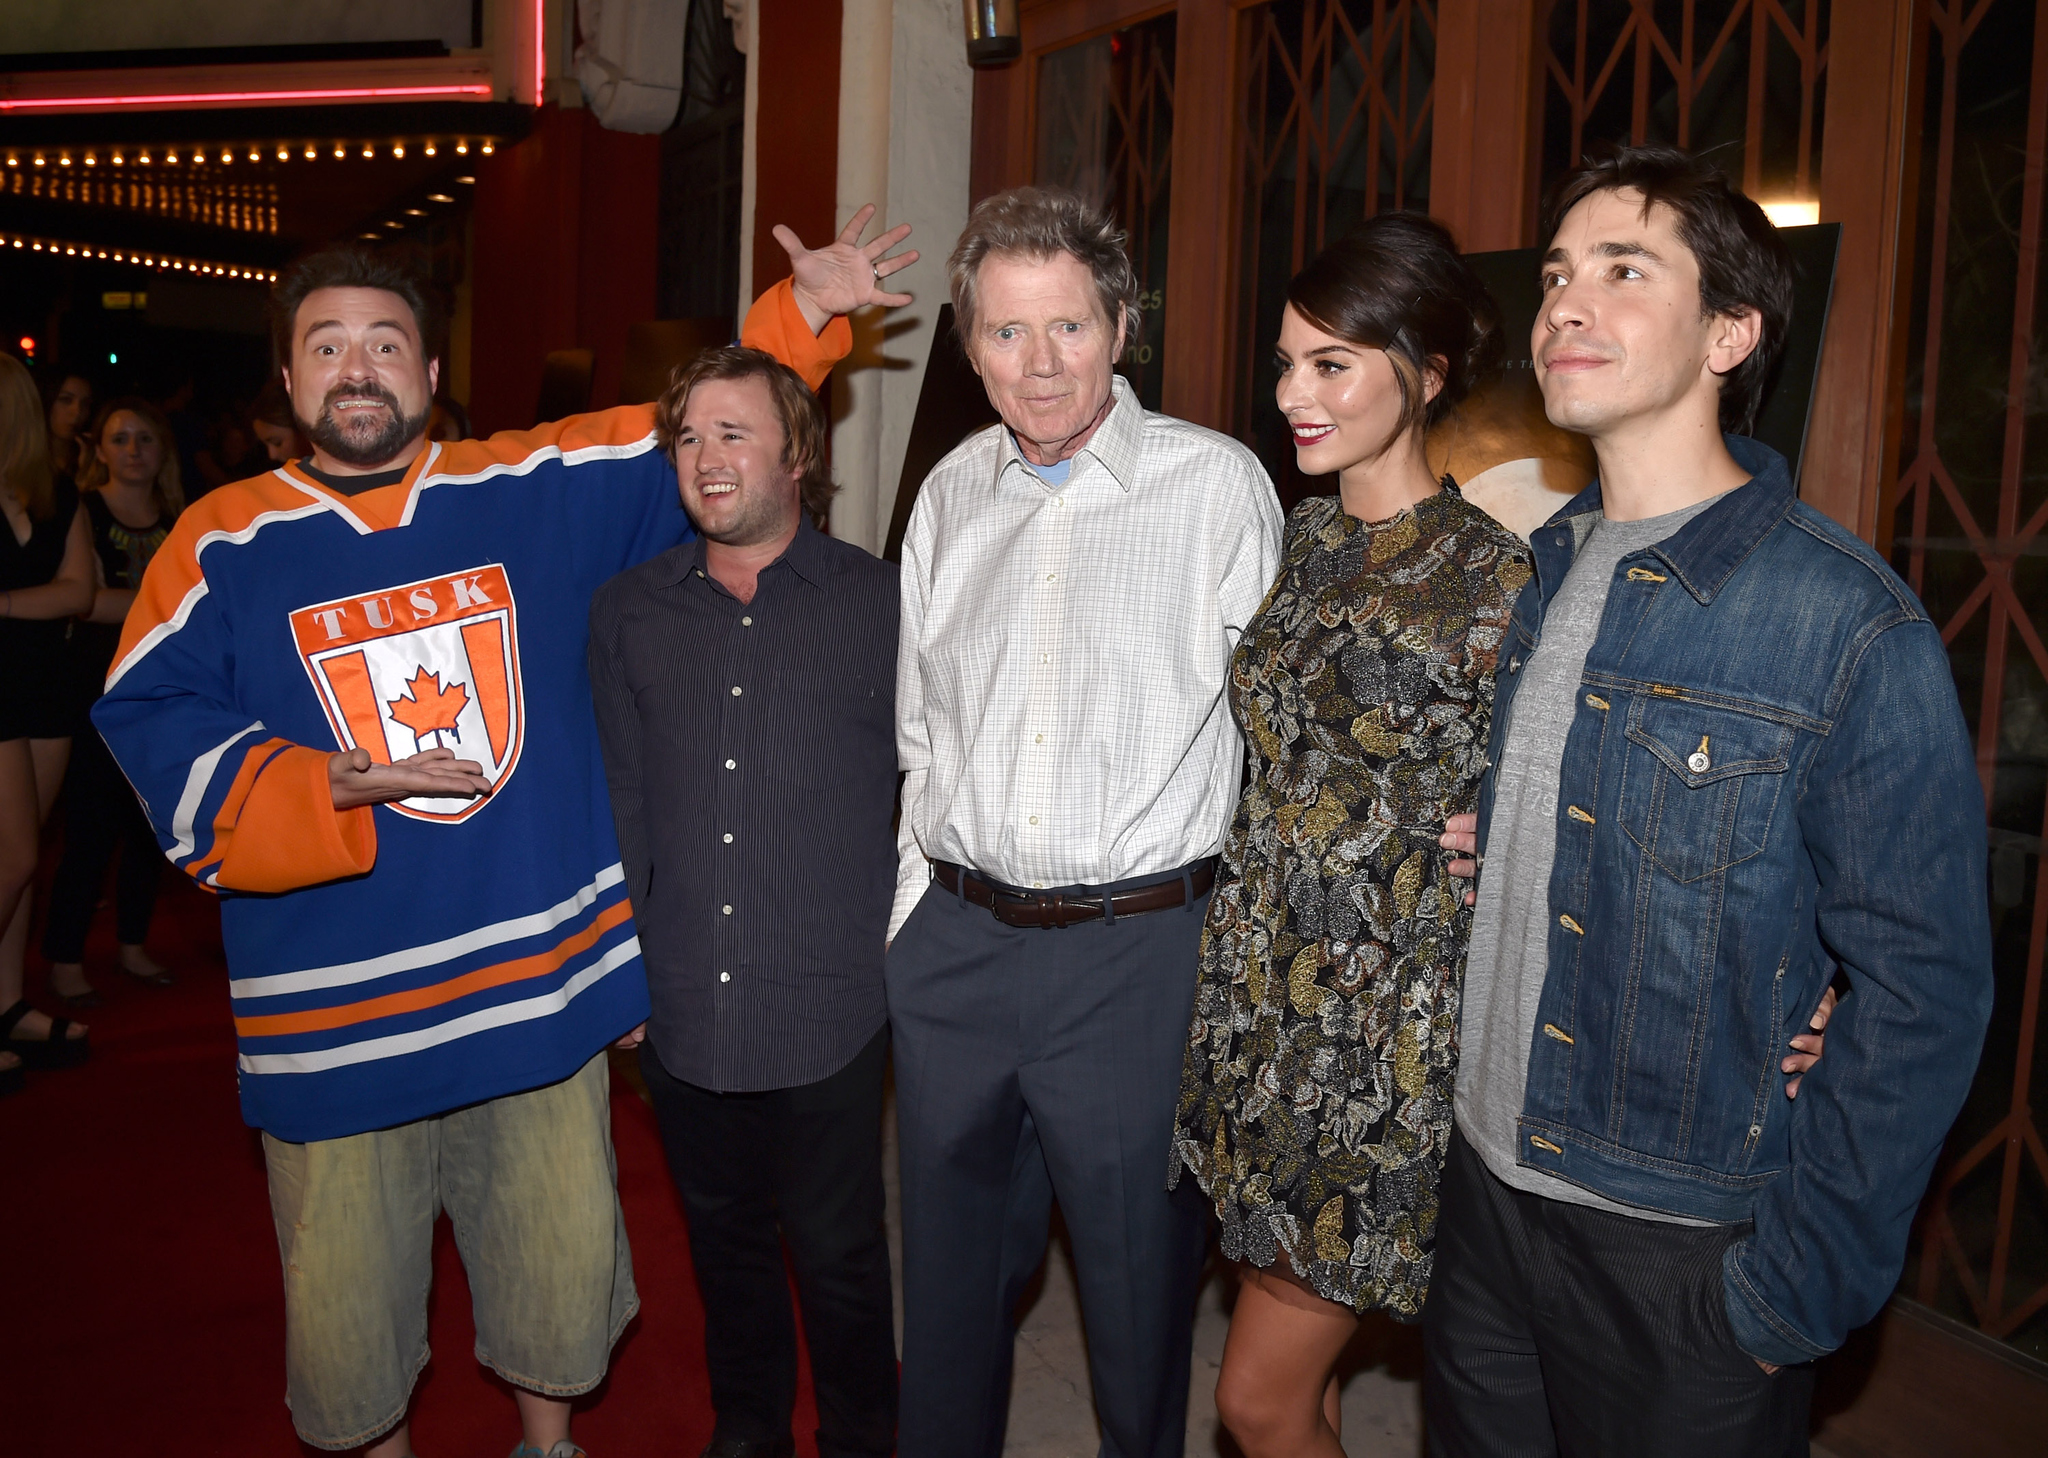 Kevin Smith, Haley Joel Osment, Justin Long, Michael Parks and Genesis Rodriguez at event of Tusk (2014)